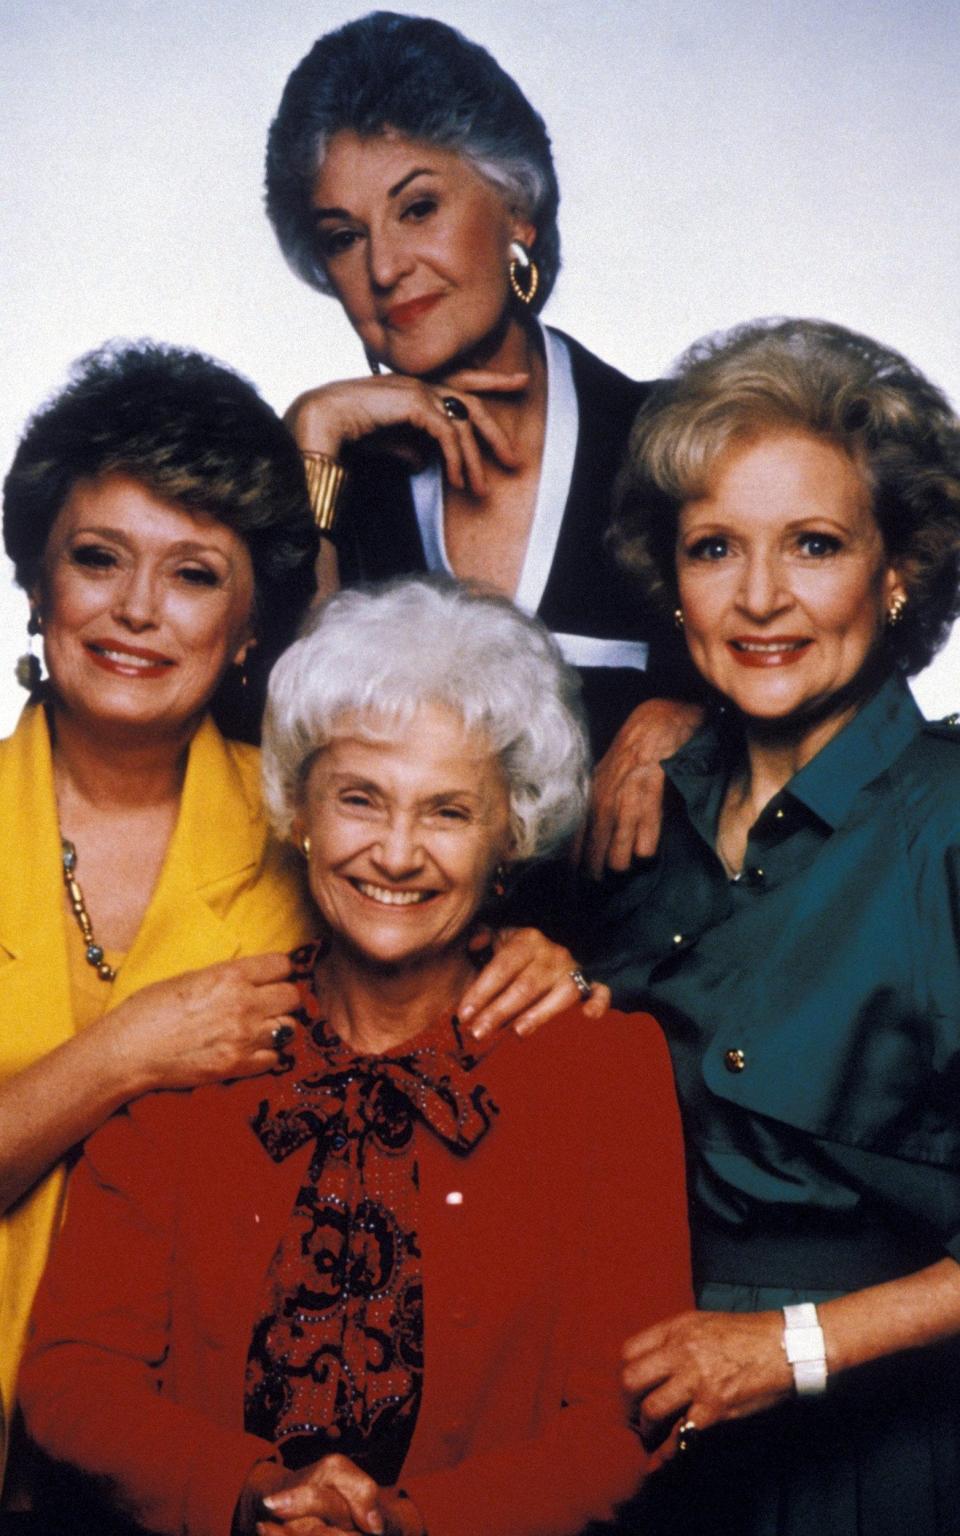 Betty White (to right of picture) with her Golden Girls co-stars Rue McClanahan, Estelle Getty and Bea Arthur - Touchstone Tv/Whitt-Thomas-Harris Prod/Kobal/Shutterstock